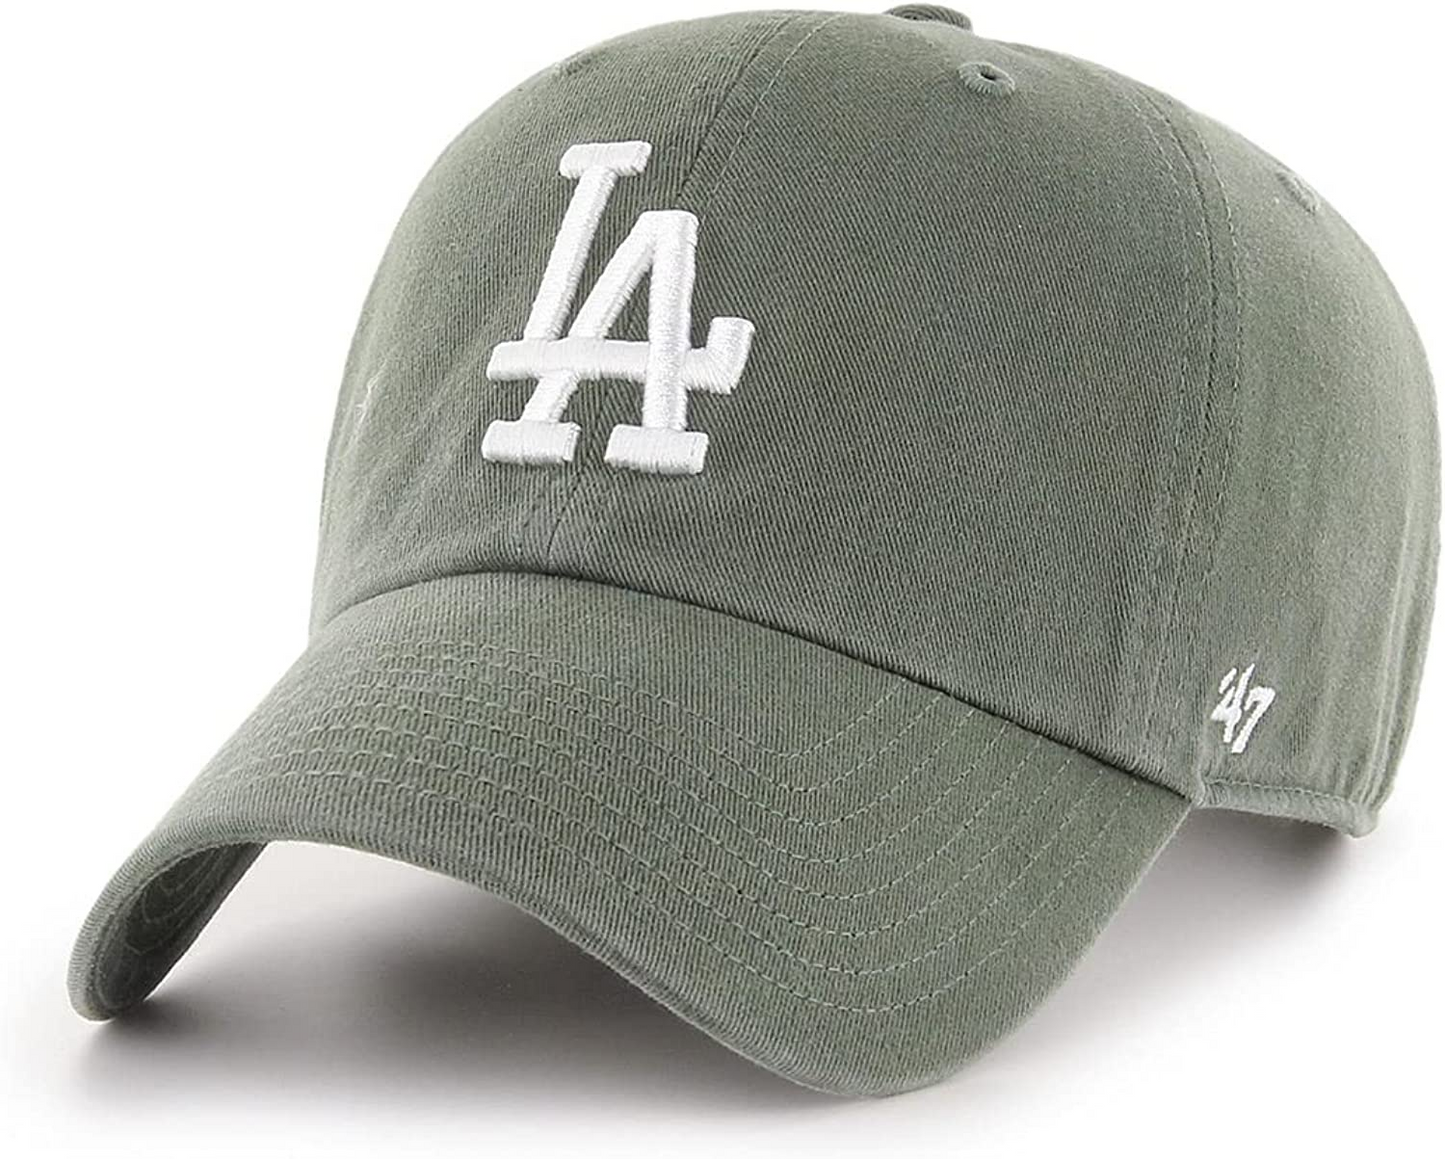 LOS ANGELES DODGERS ADJUSTABLE 47 BRAND CLEAN UP HAT - MOSS GREEN